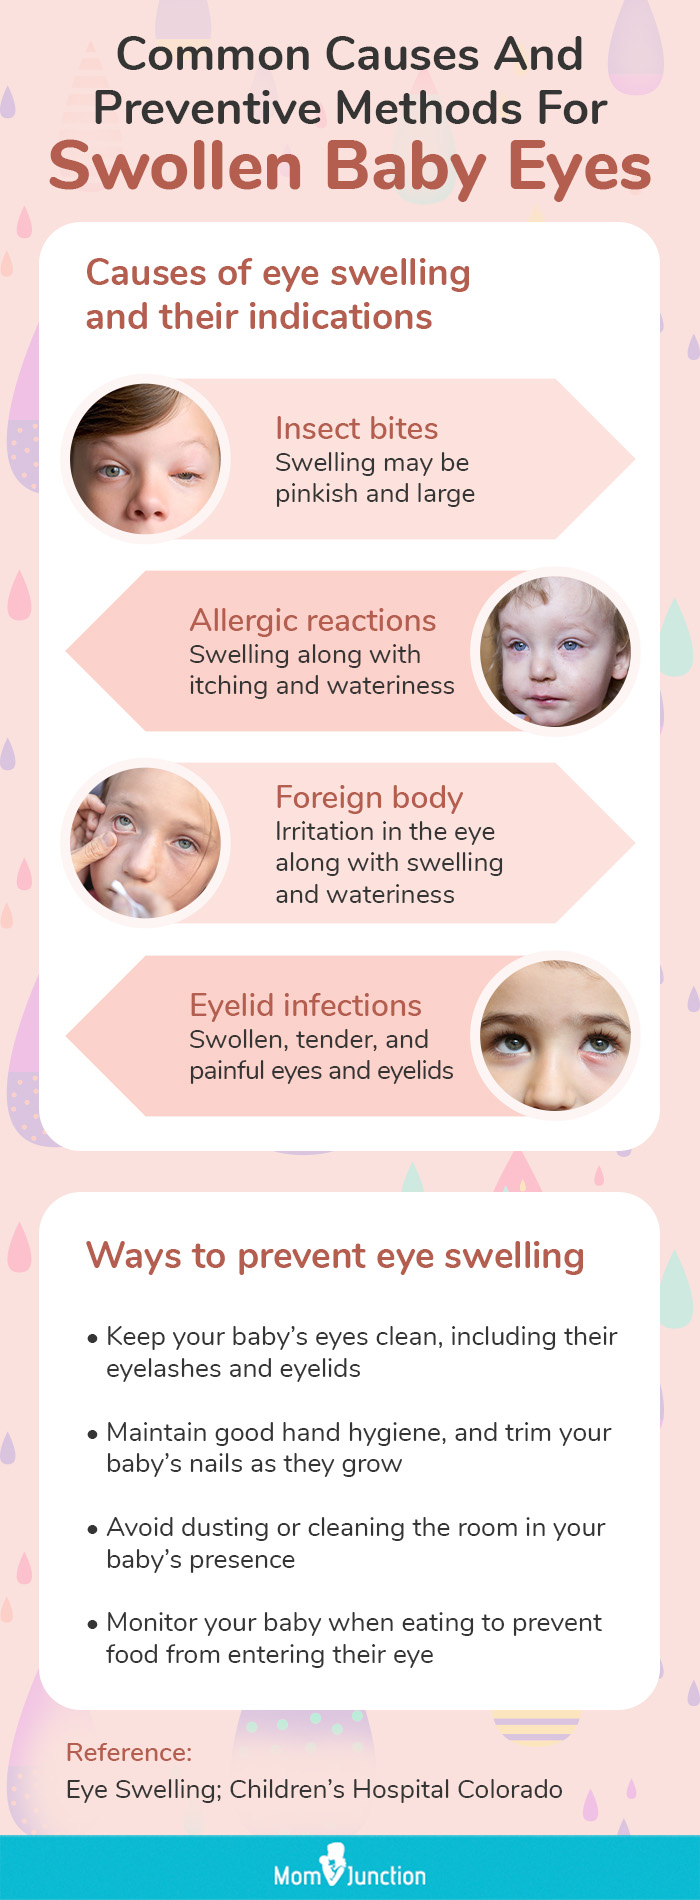 causes and preventive methods for swollen baby (infographic)